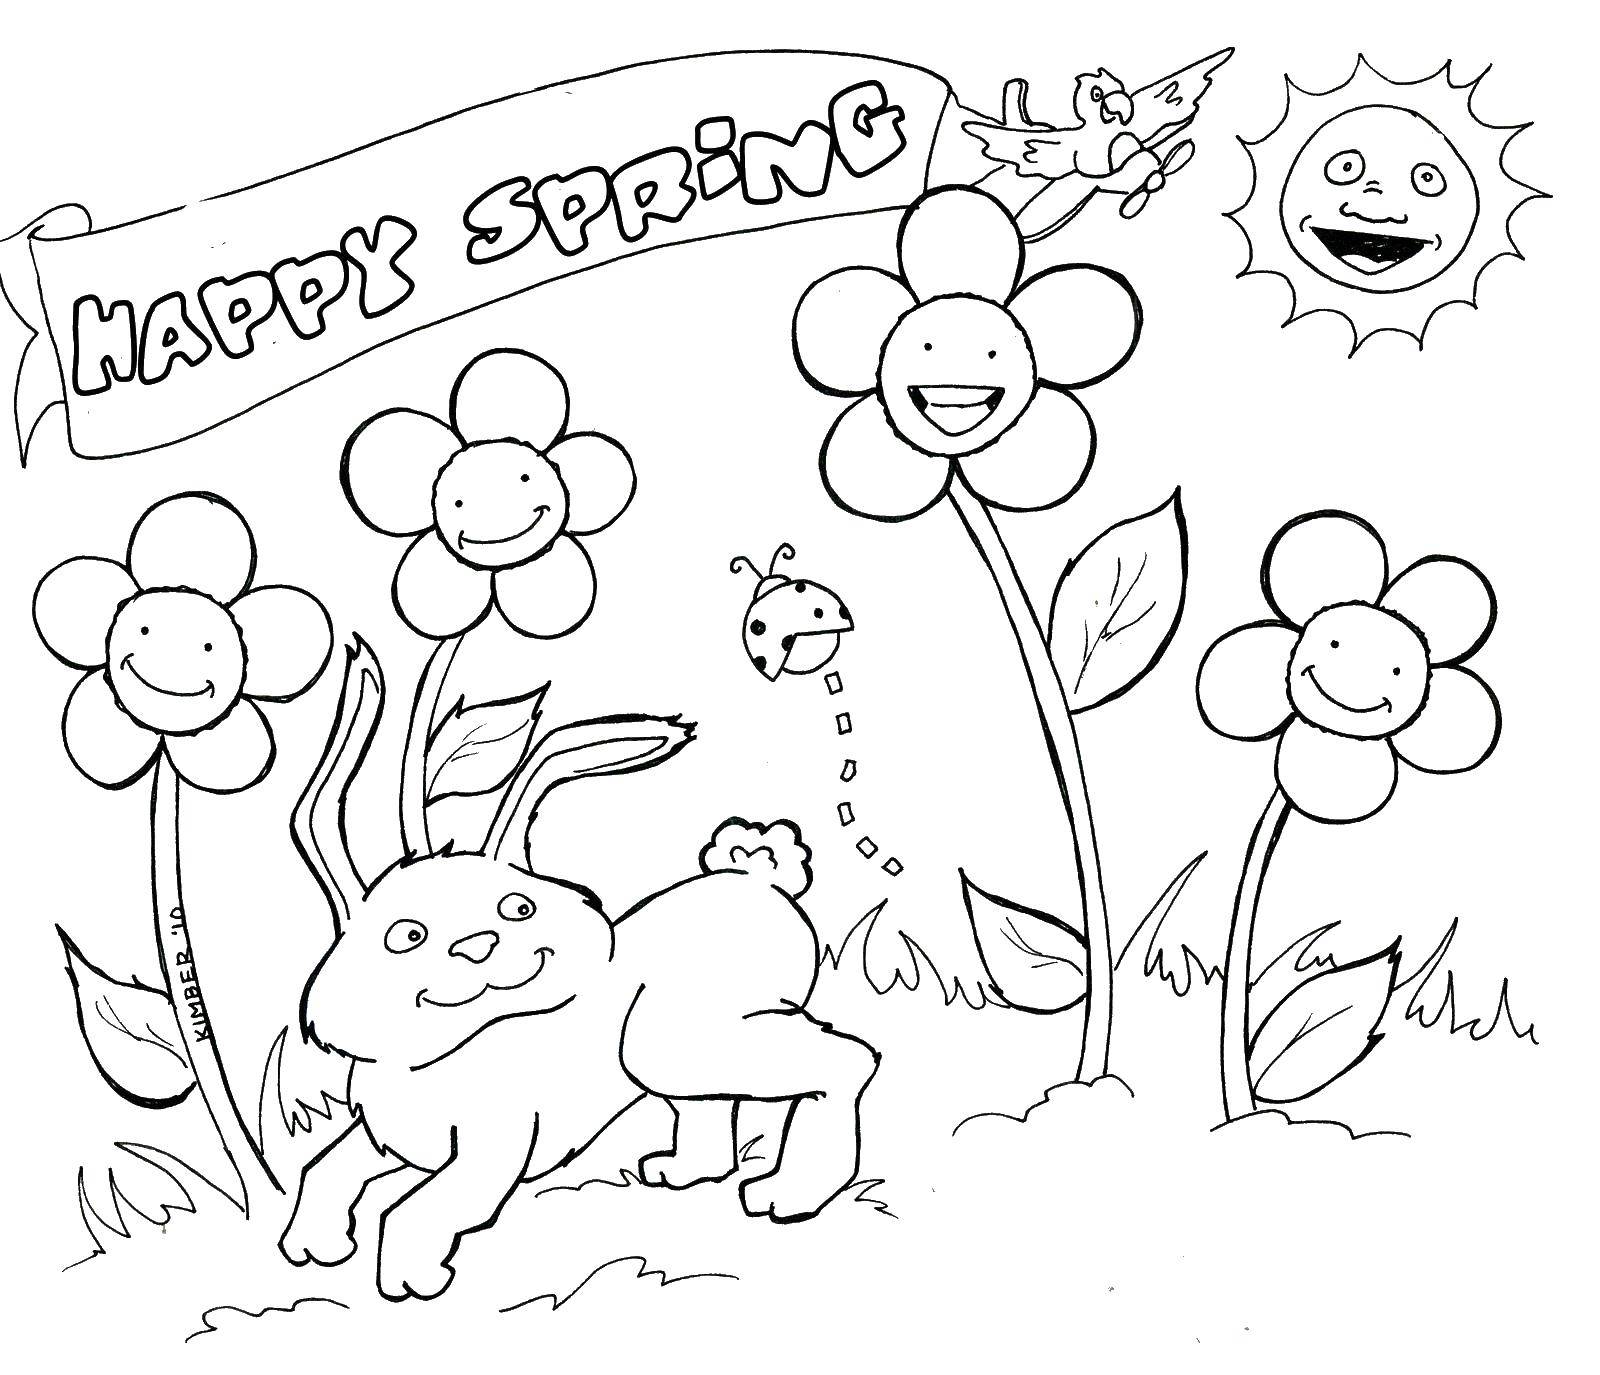 Coloring Spring. Category spring. Tags:  spring, Bunny, flowers.